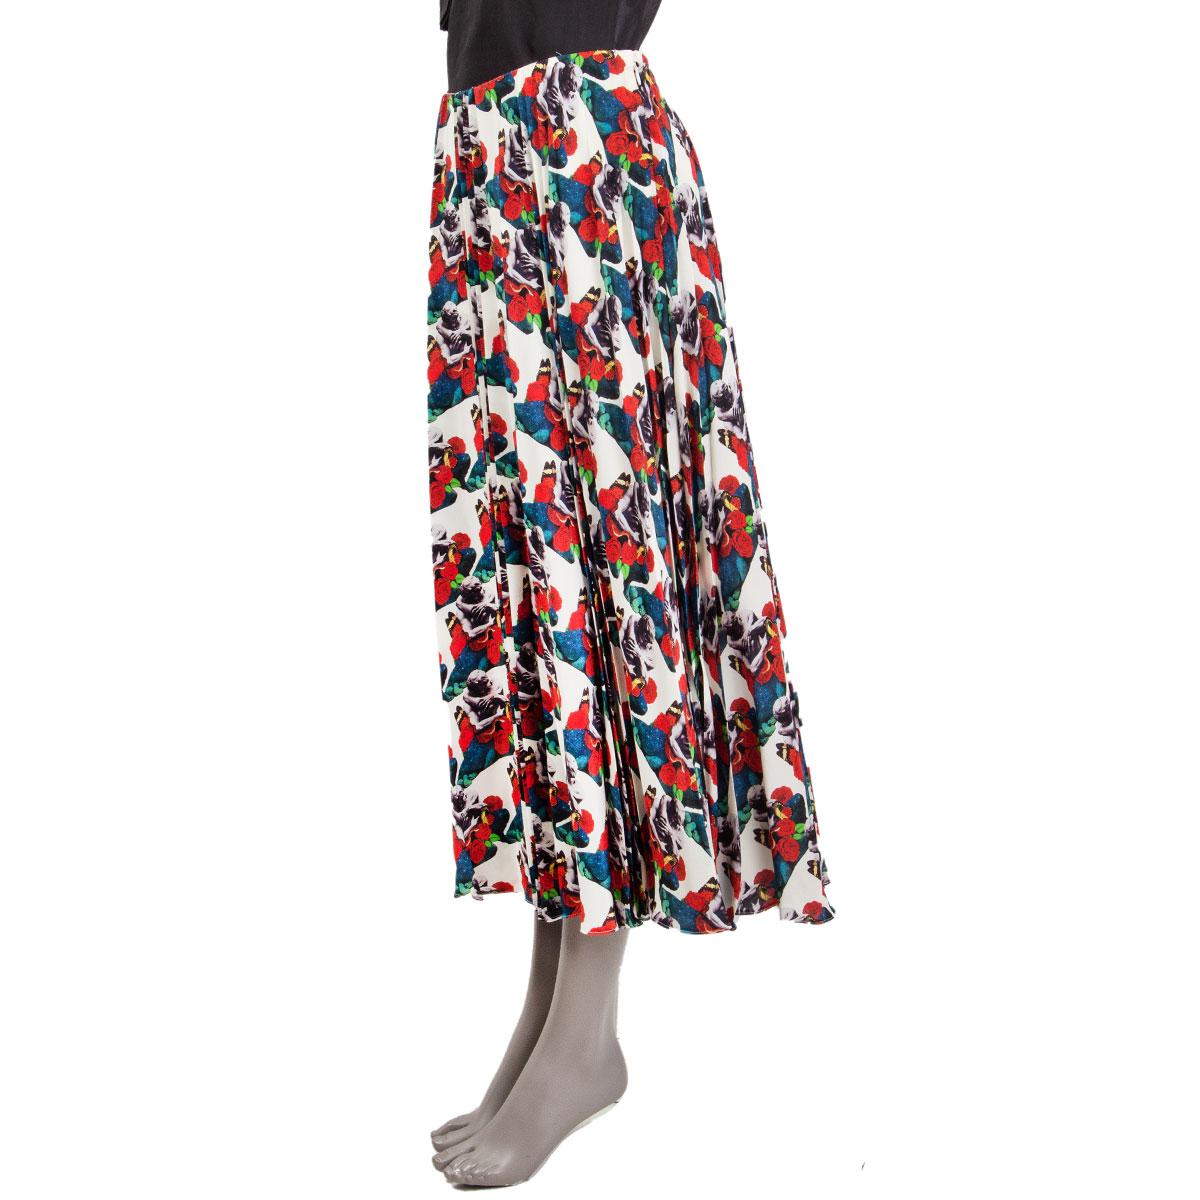 100% authentic Valentino x Undercover lovers print pleated knee-lenght skirt in off-white silk (missing content tag) with multicolored print. Closes with a concealed zipper on the side. Lined in white silk (missing tag). Has been worn and is in